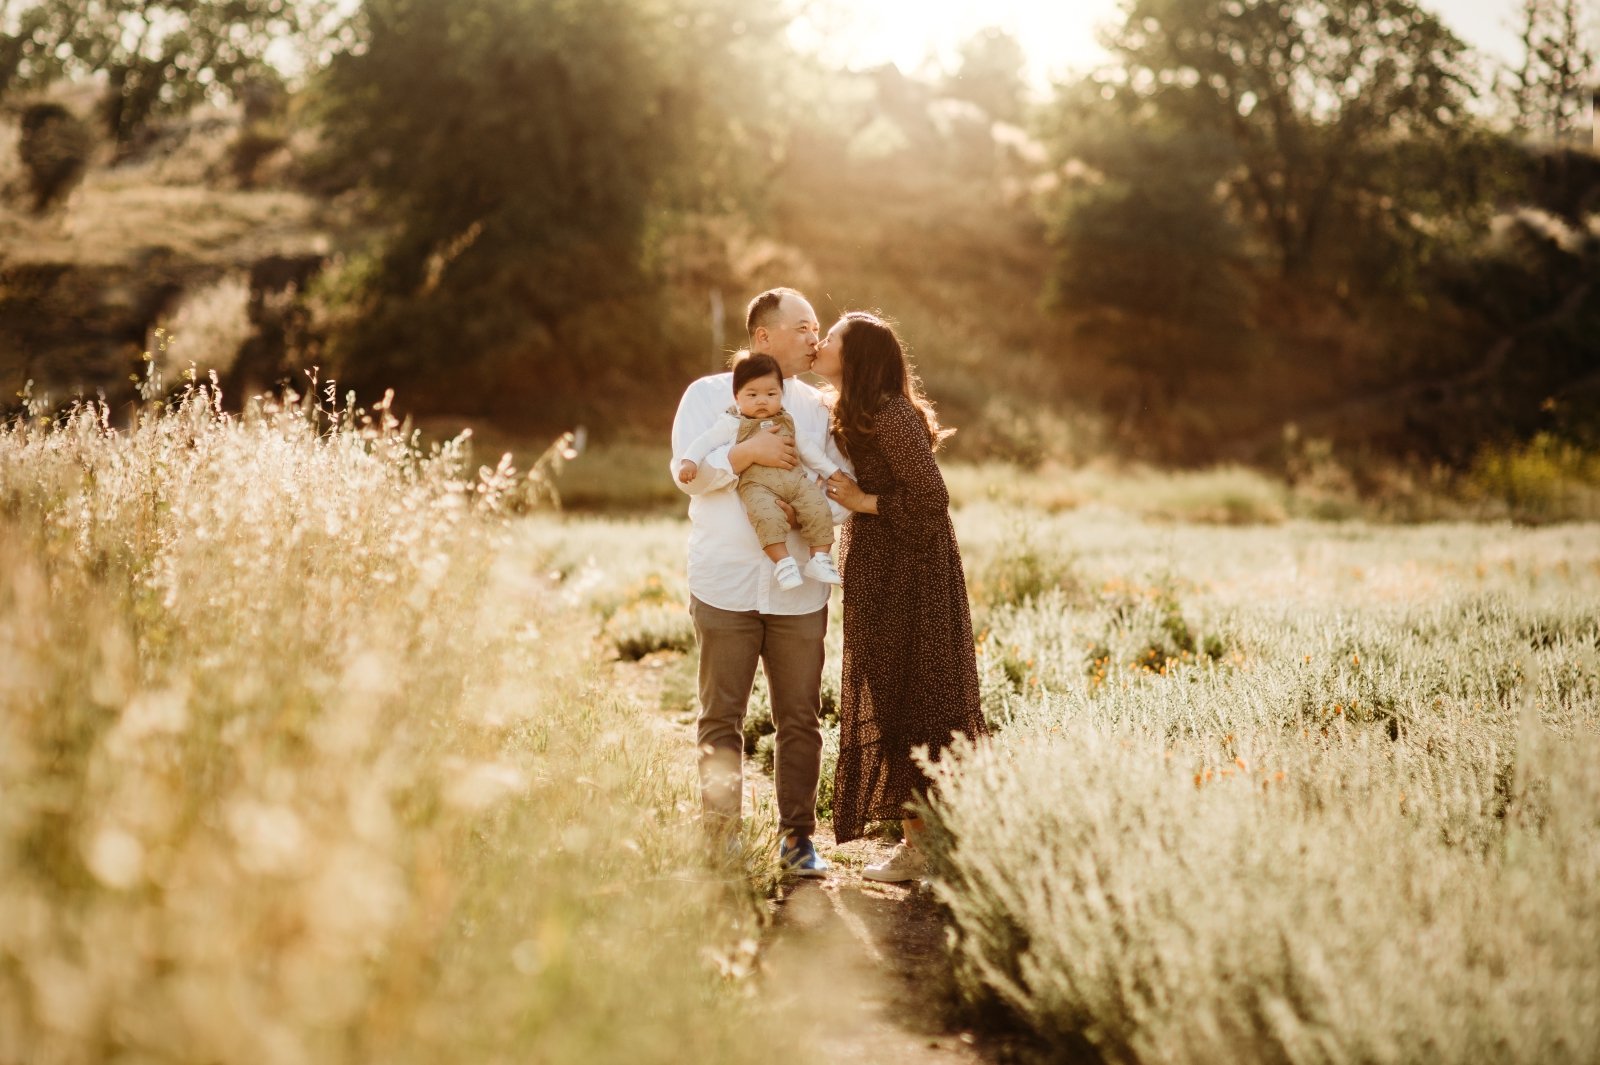 EAST BAY AREA FAMILY PHOTOGRAPHY SHELL RIDGE OPEN SPACE BABY LIFESTYLE PHOTOSHOOT  5.jpg